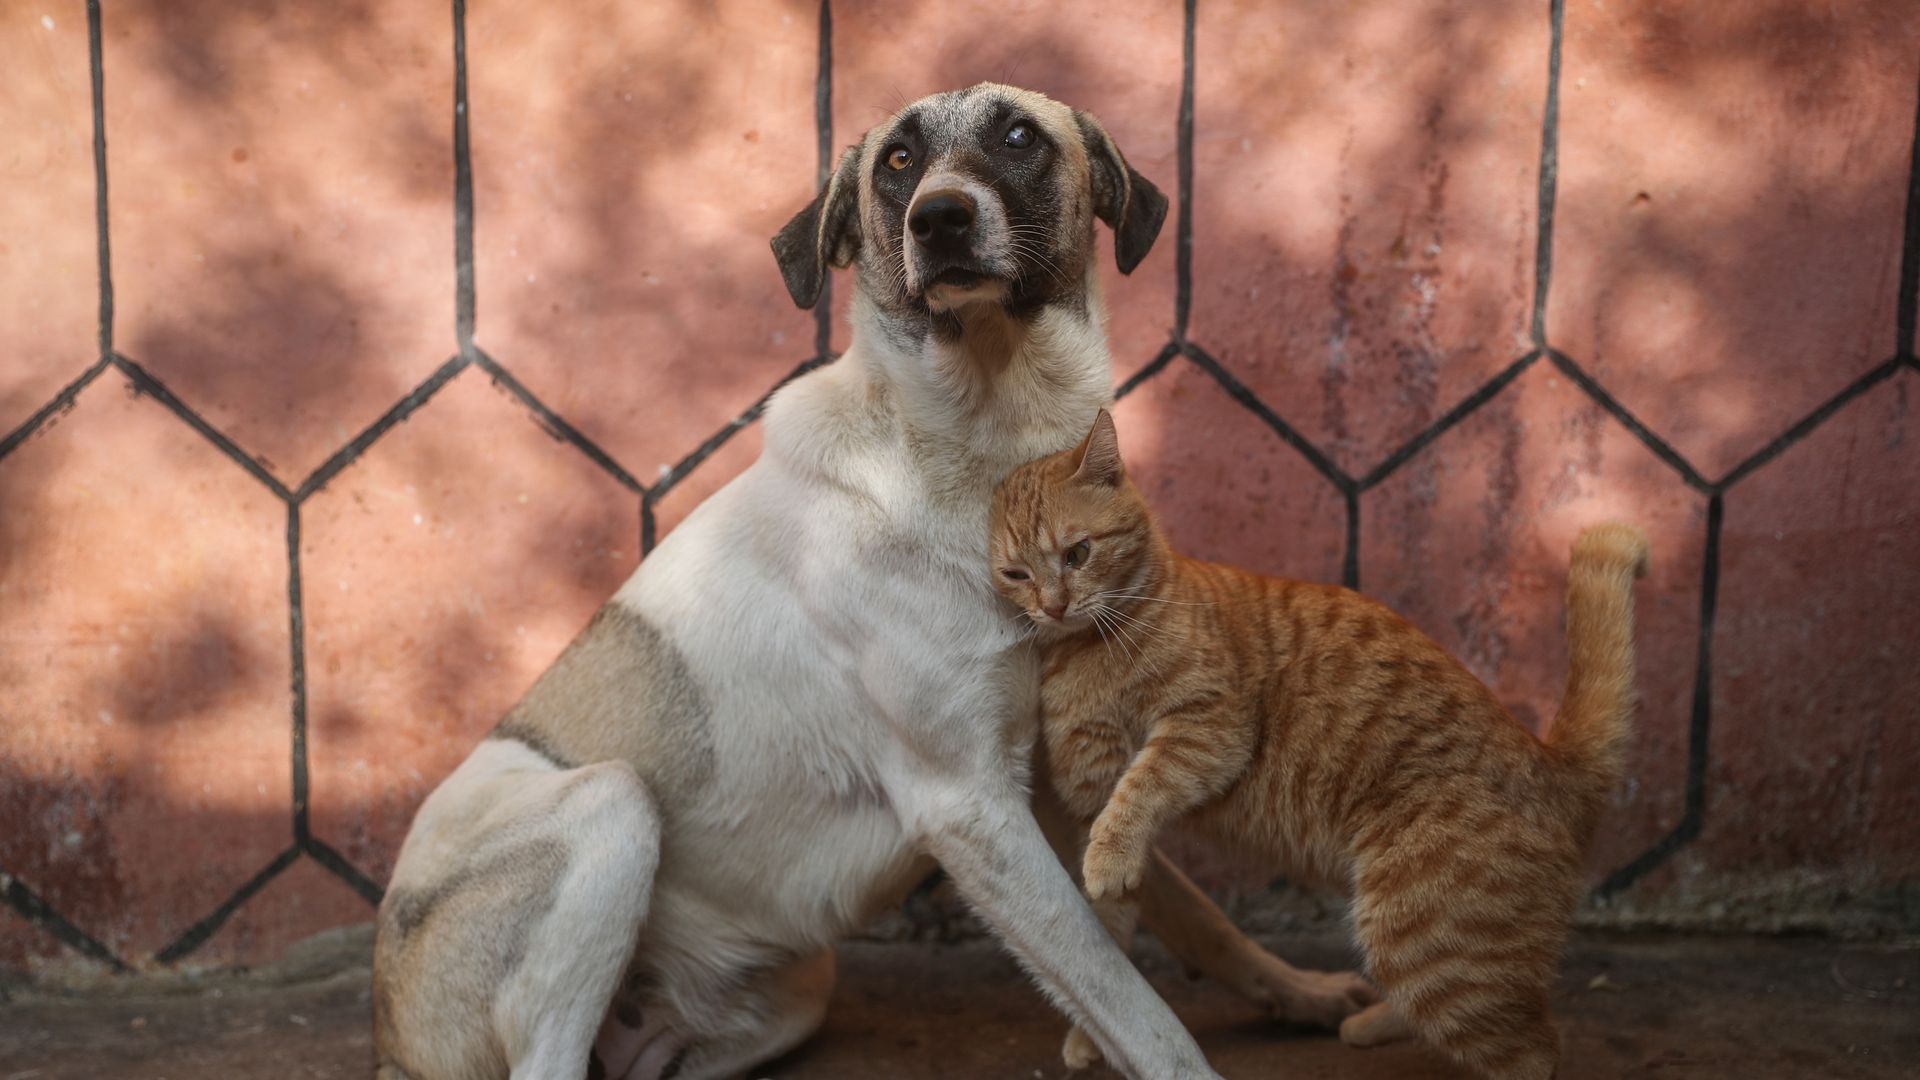 A photo of a dog and cat